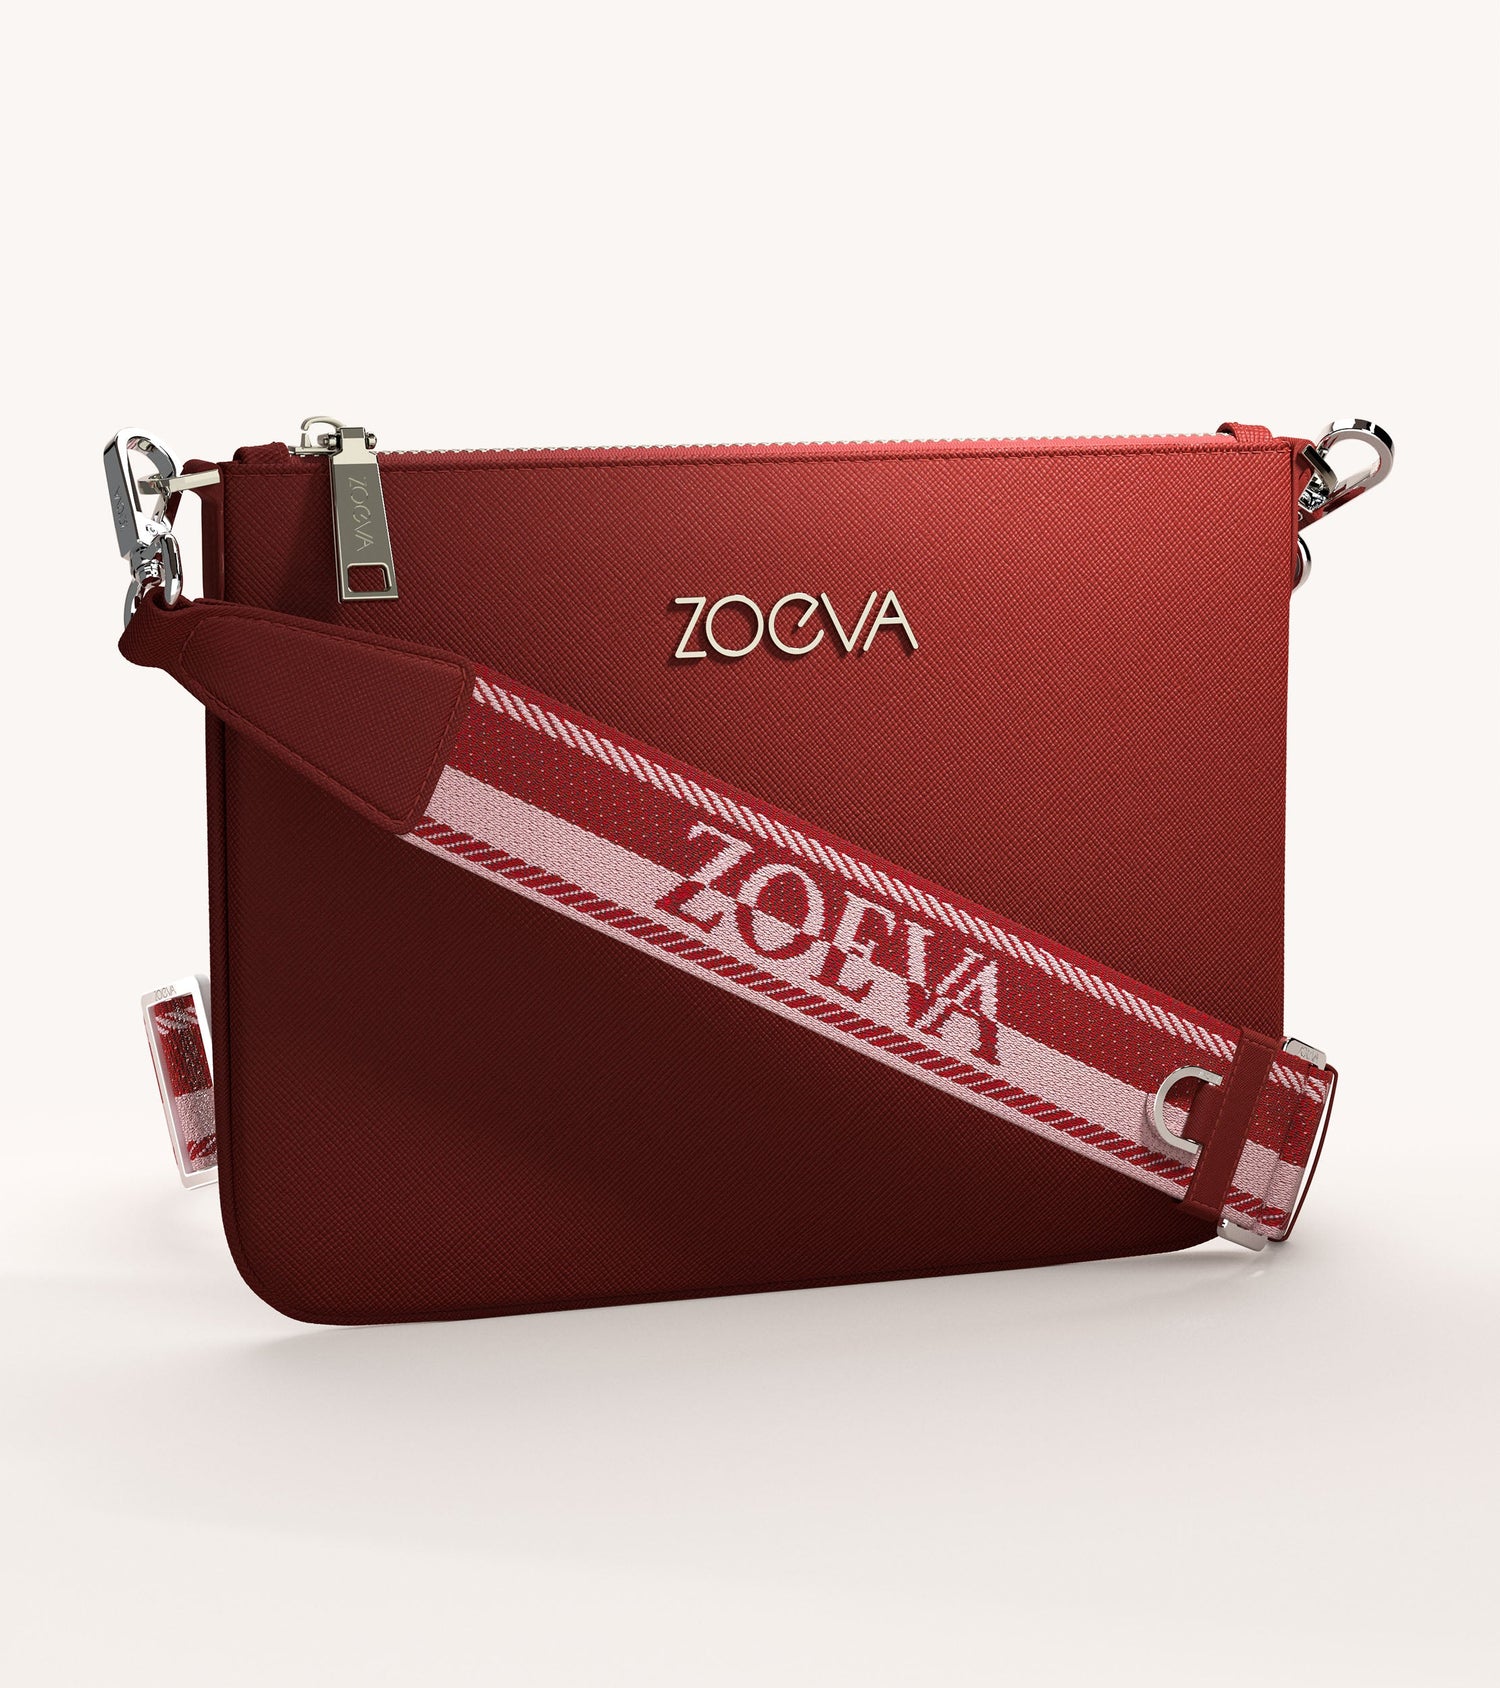 The Everyday Clutch & Shoulder Strap (Cherry) Main Image featured